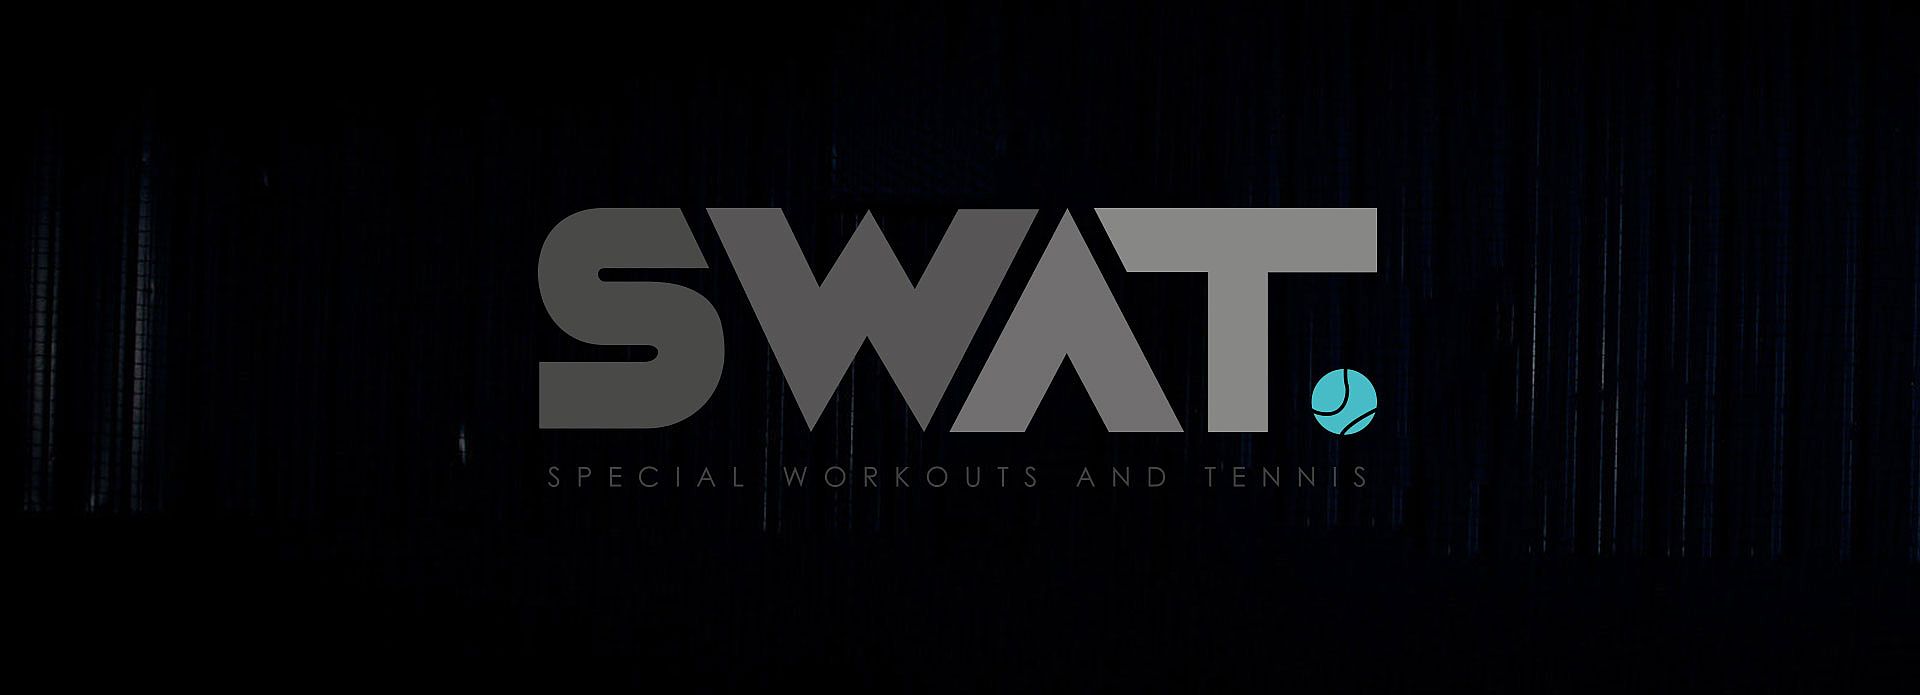 Home Swat Special Workouts And Tennis